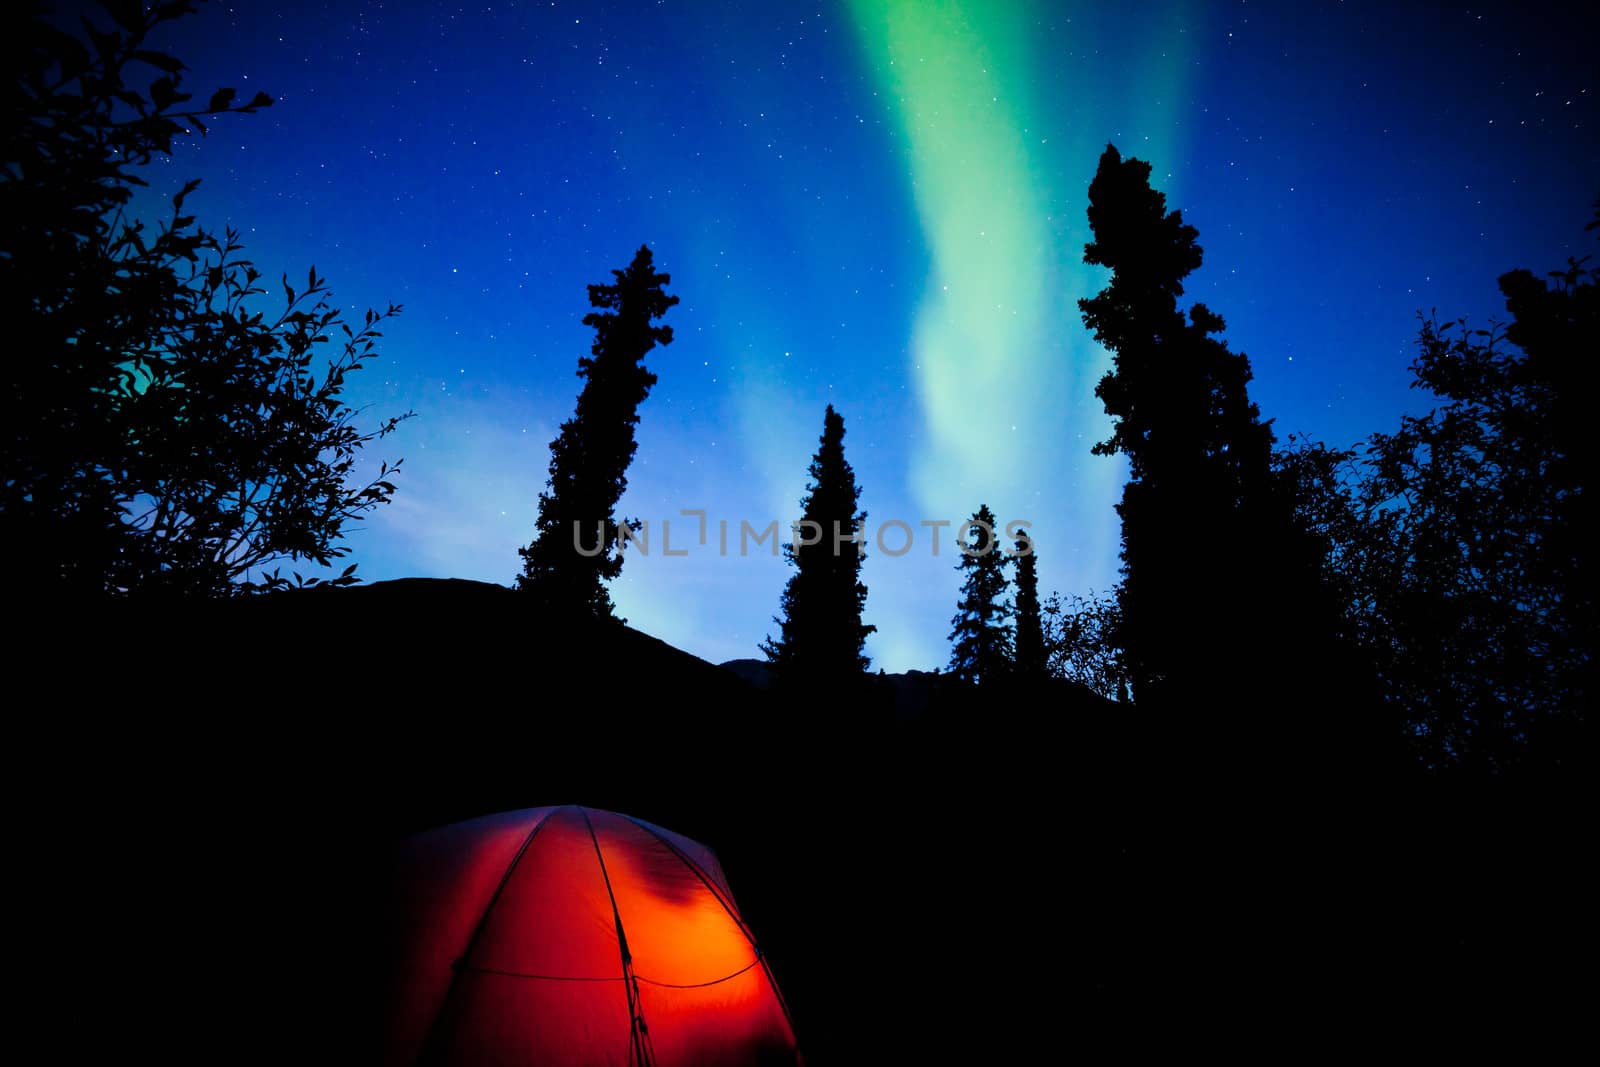 Tent camping in boreal forest taiga under a flare of northern lights, Aurora borealis, or polar lights in starry night sky